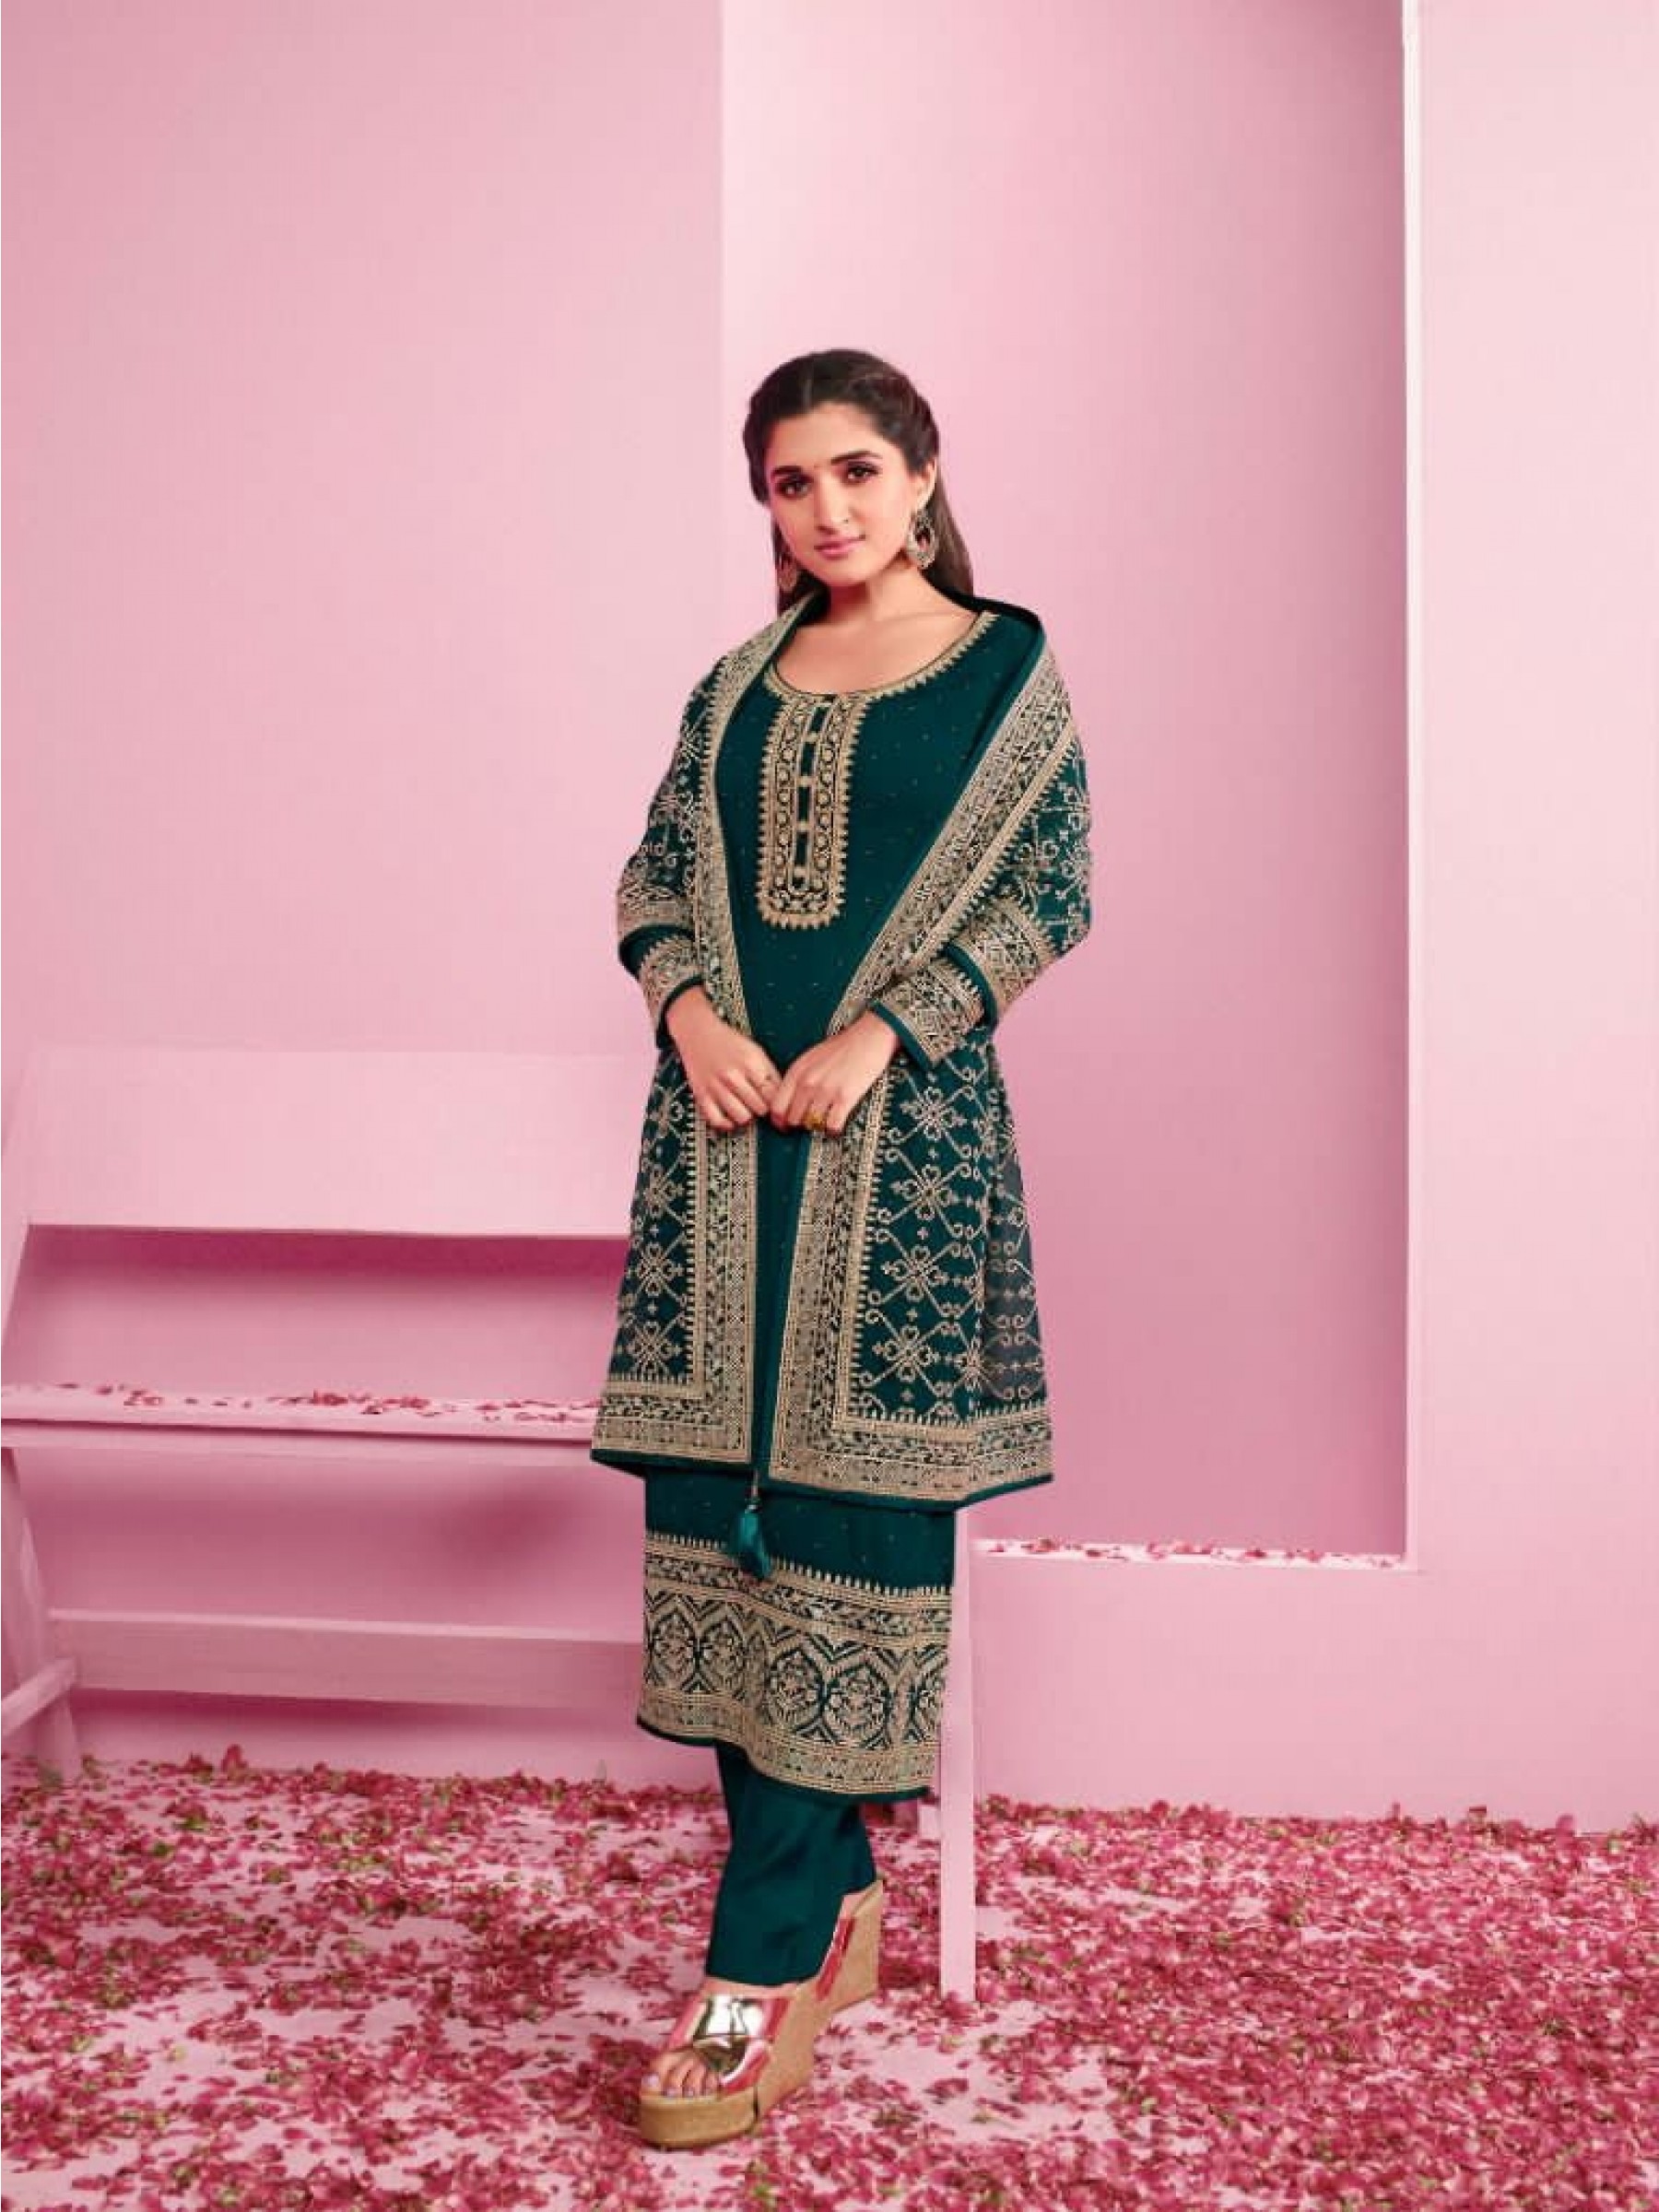  Georgette  Party Wear  Suit  in Teal Green Color with  Embroidery Work